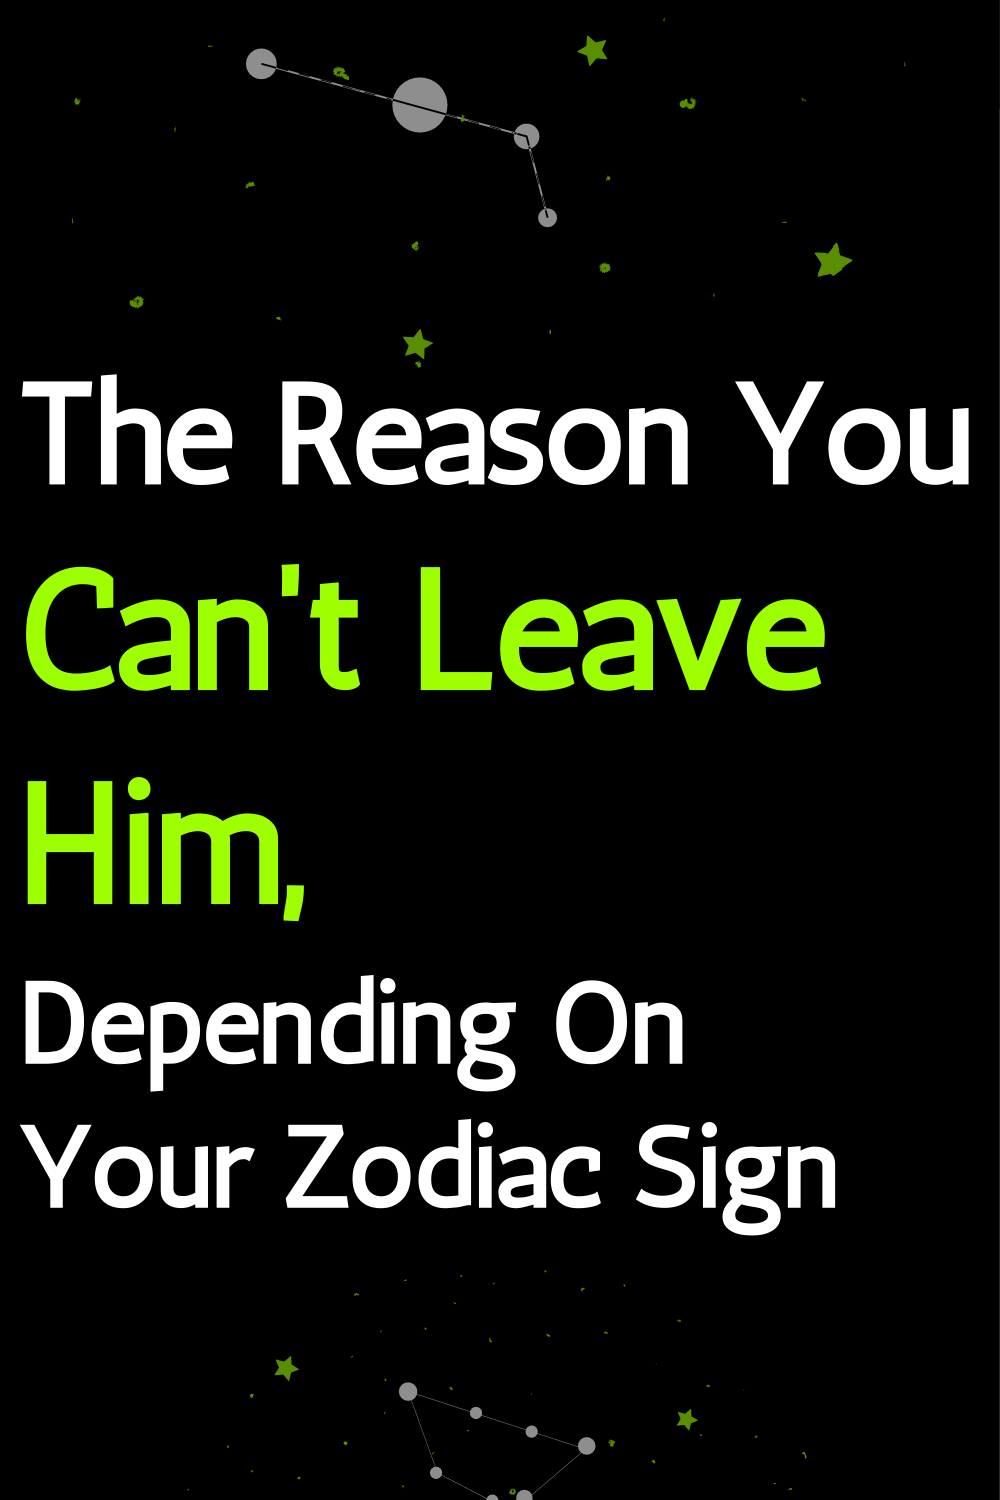 The Reason You Can't Leave Him, Depending On Your Zodiac Sign